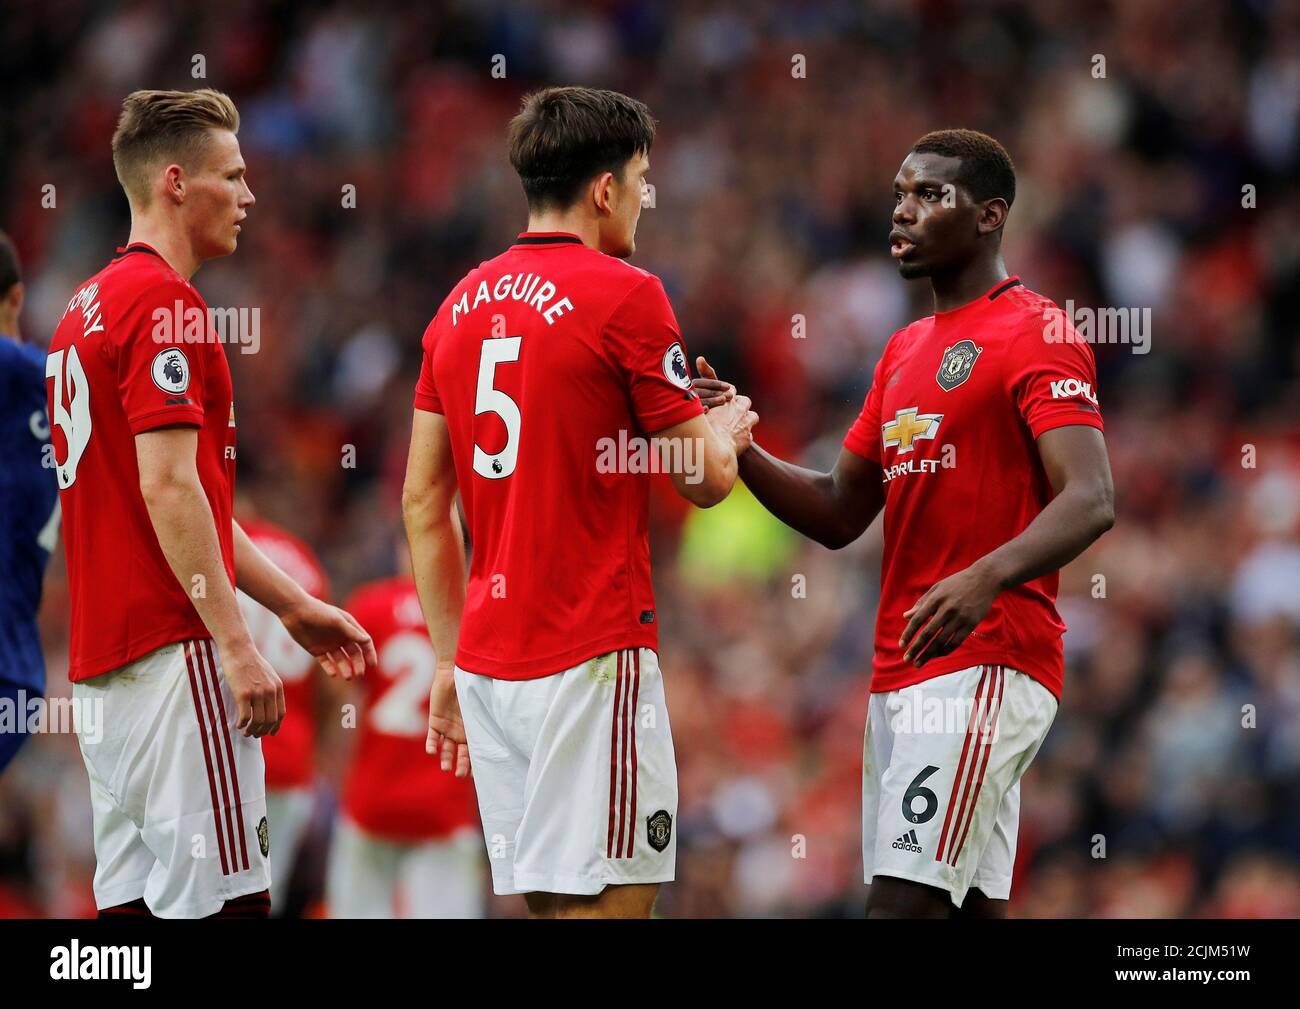 Soccer Football - Premier League - Manchester United v Chelsea - Old Trafford, Manchester, Britain - August 11, 2019  Manchester United's Harry Maguire and Paul Pogba celebrate at the end of the match  REUTERS/Phil Noble  EDITORIAL USE ONLY. No use with unauthorized audio, video, data, fixture lists, club/league logos or 'live' services. Online in-match use limited to 75 images, no video emulation. No use in betting, games or single club/league/player publications.  Please contact your account representative for further details. Stock Photo